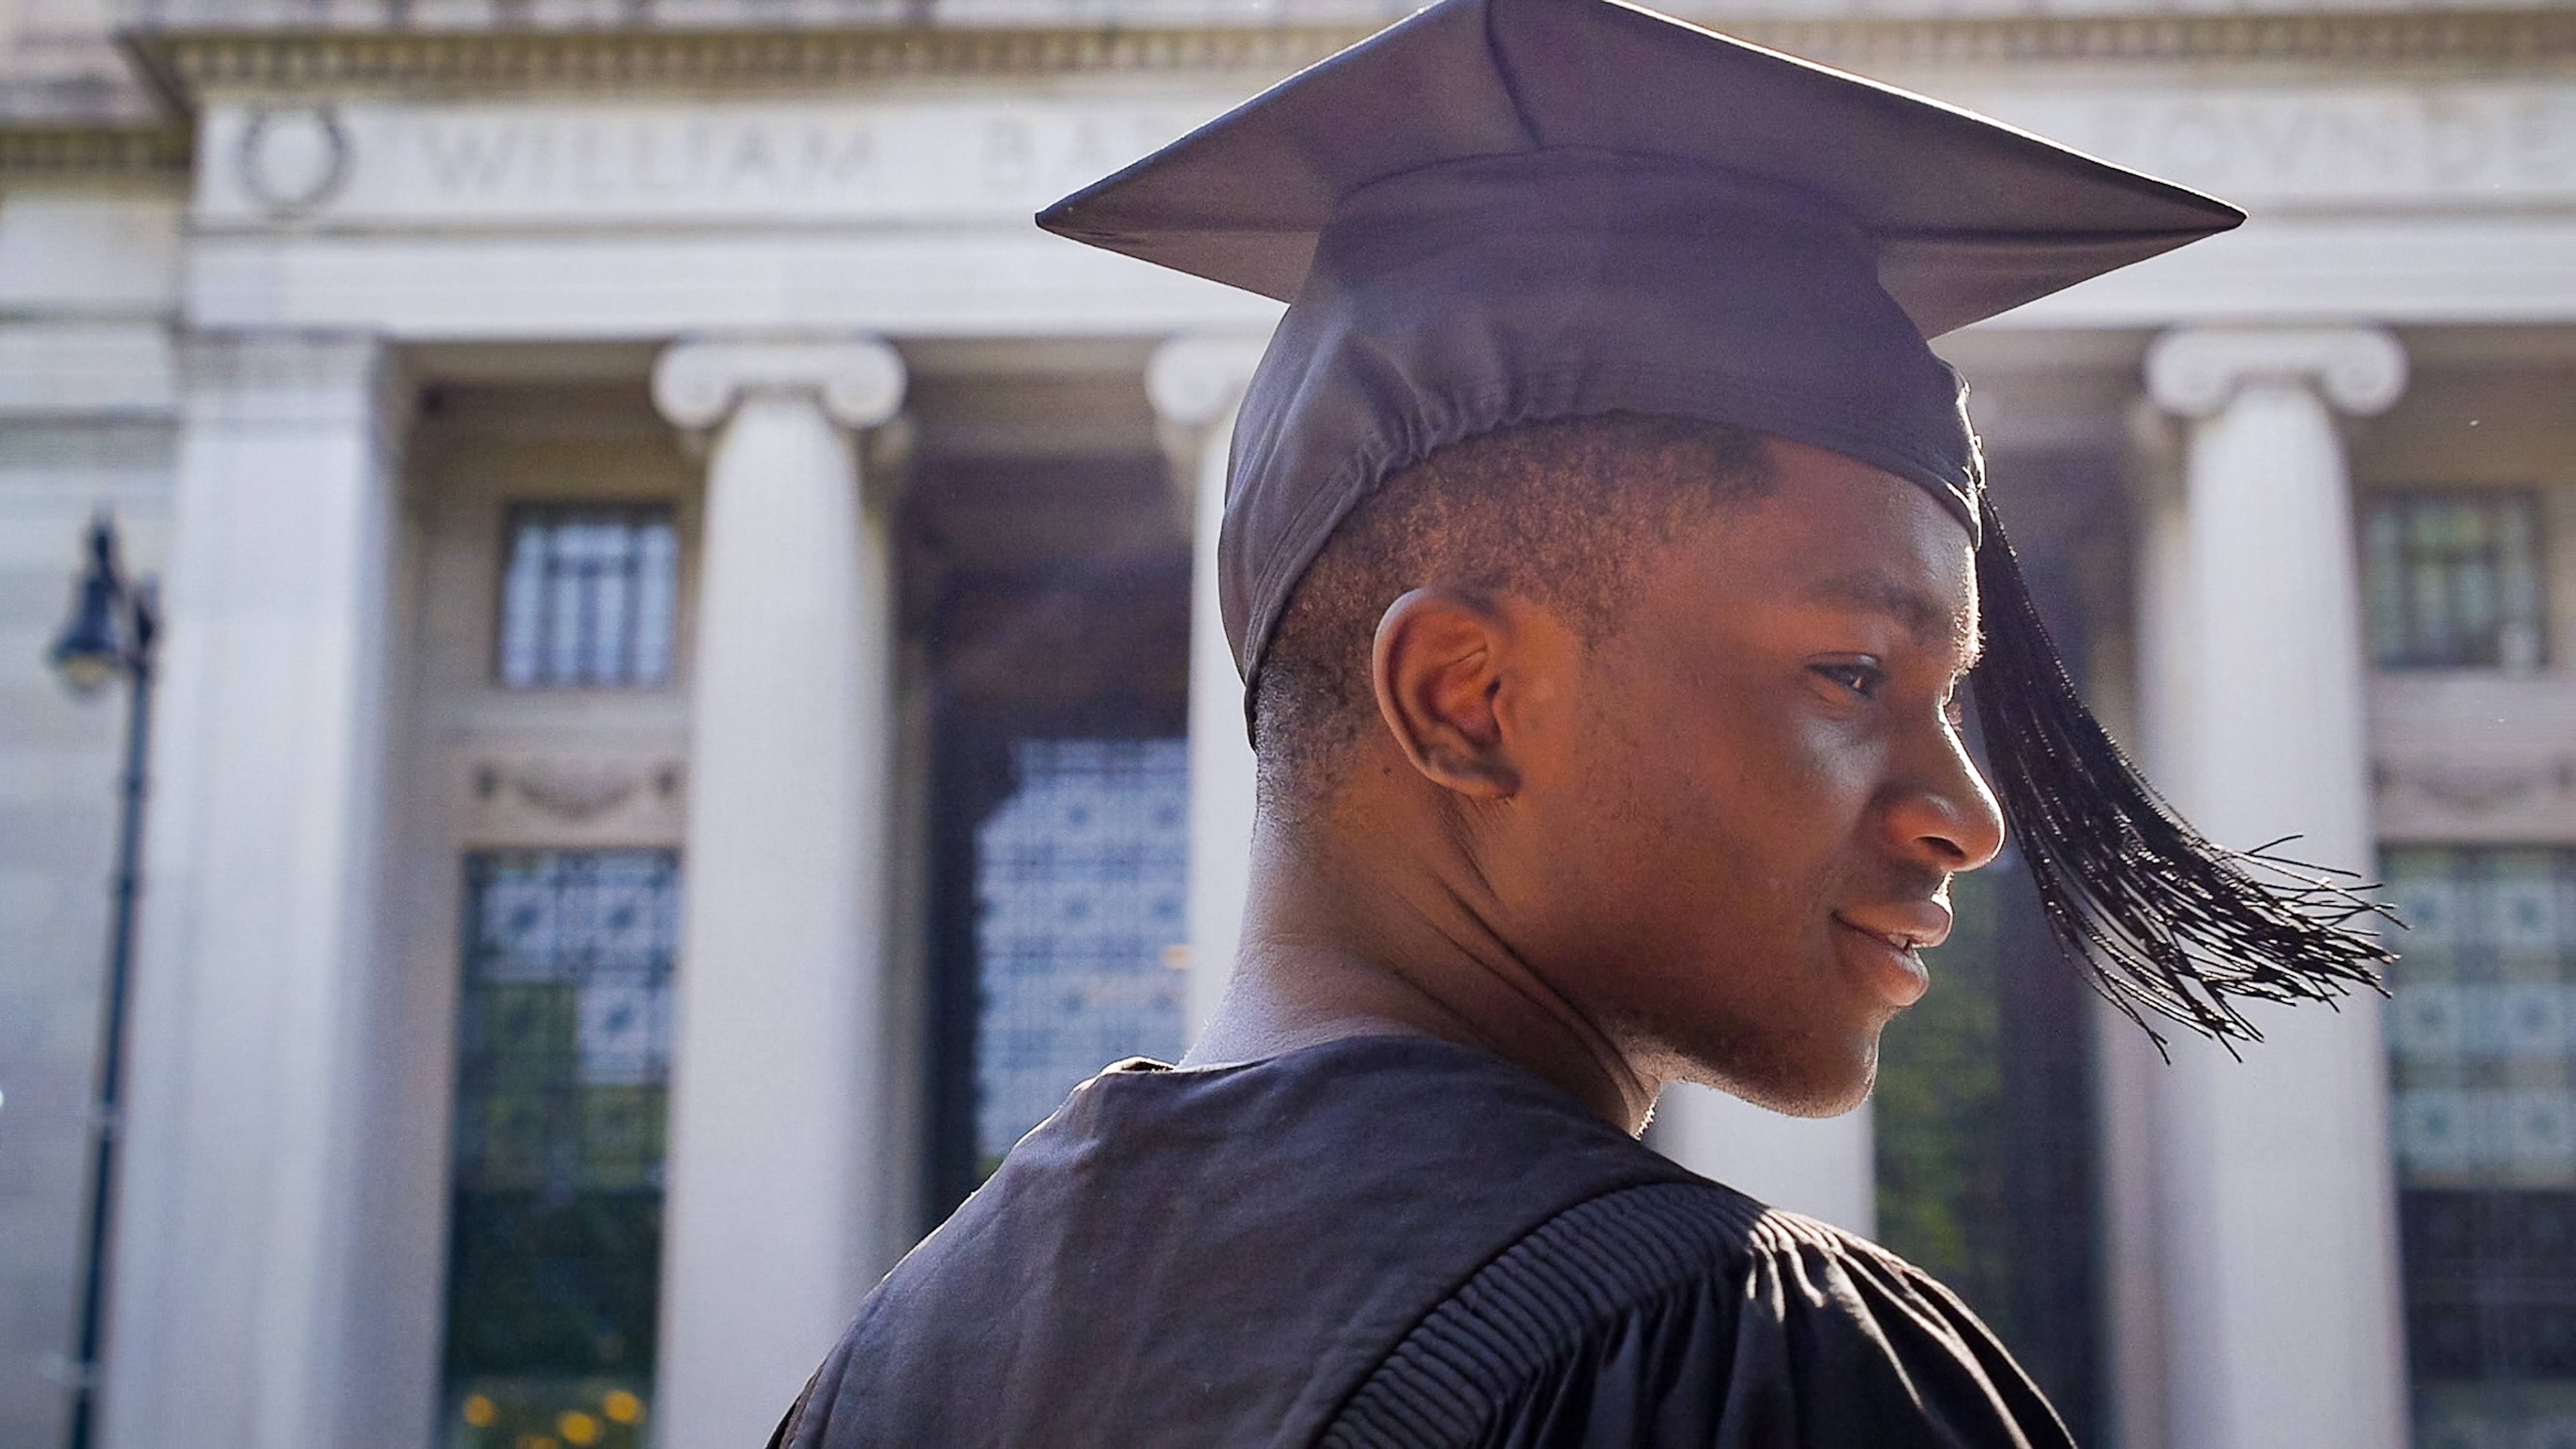 A smiling young black man in graduation cap and gown stands before a tall white stone building with columns.